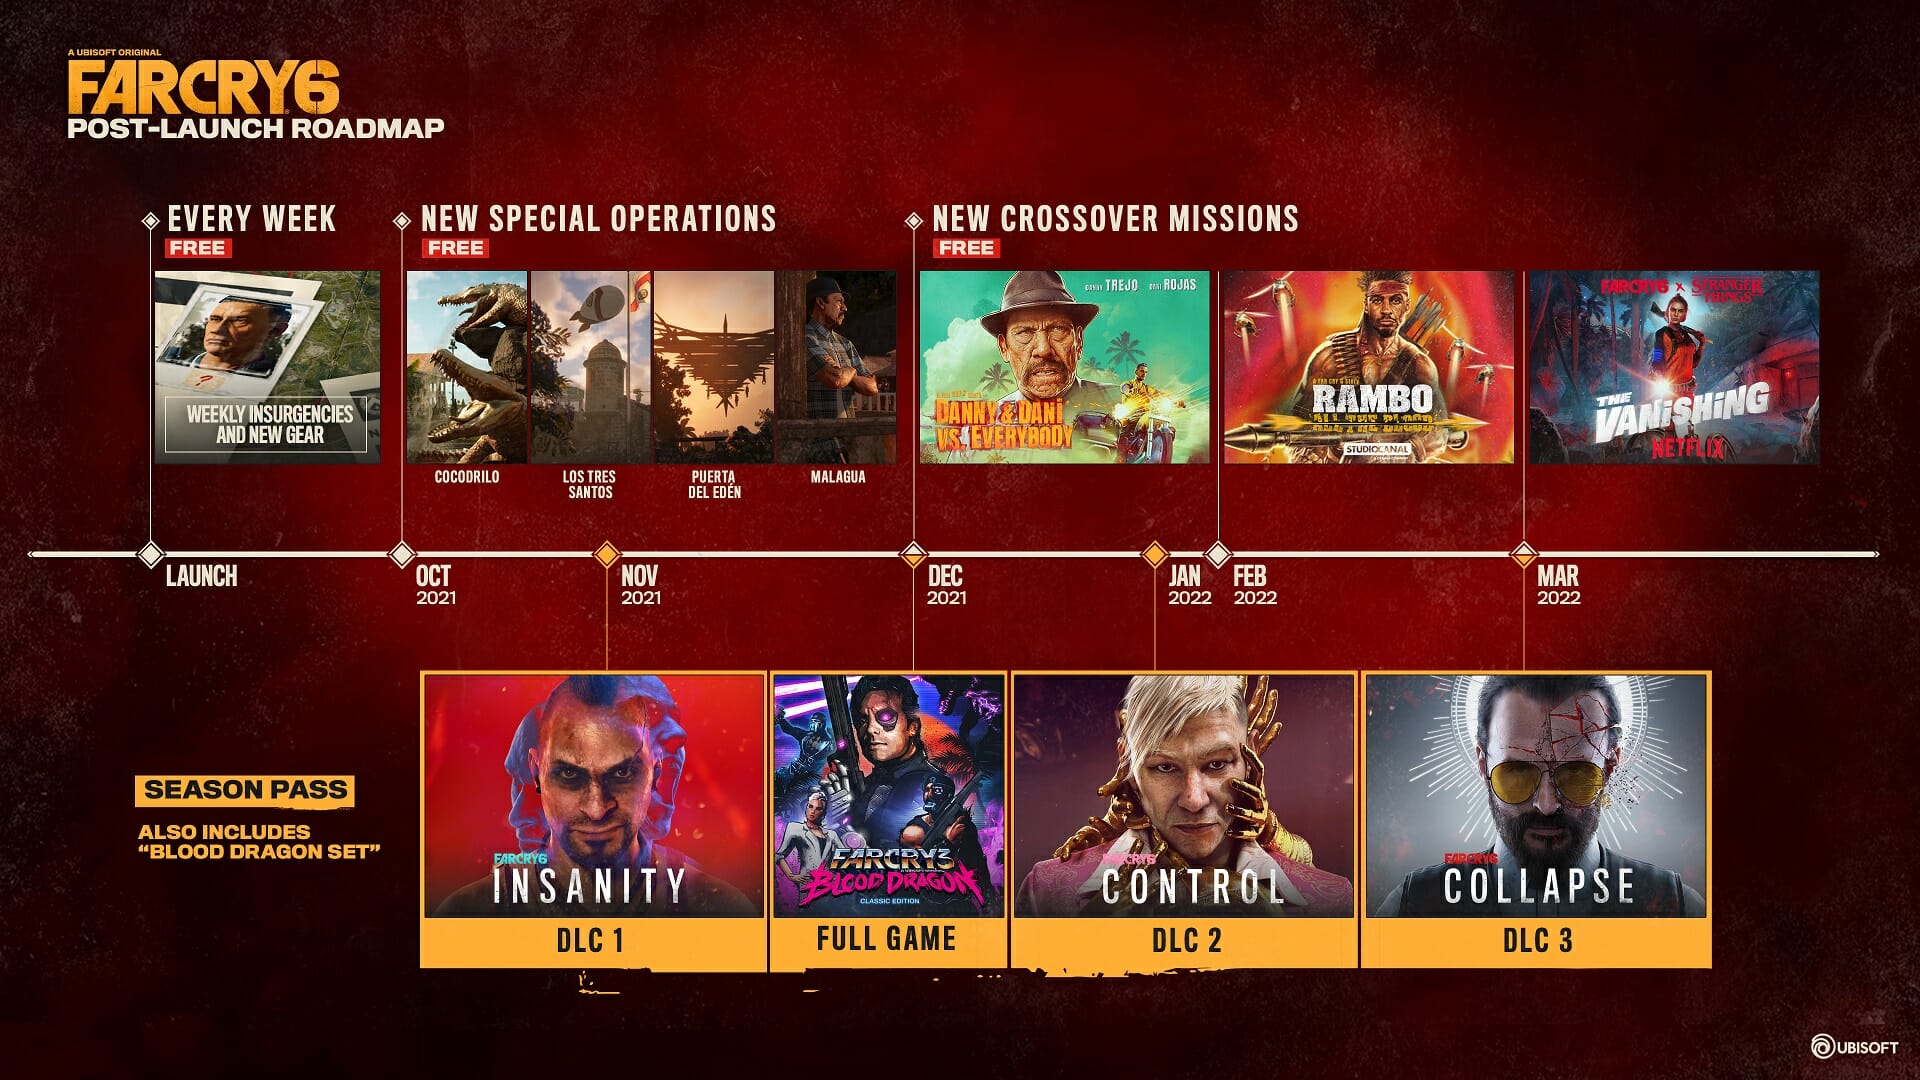 Far Cry® 6 Game of the Year Upgrade Pass - Epic Games Store